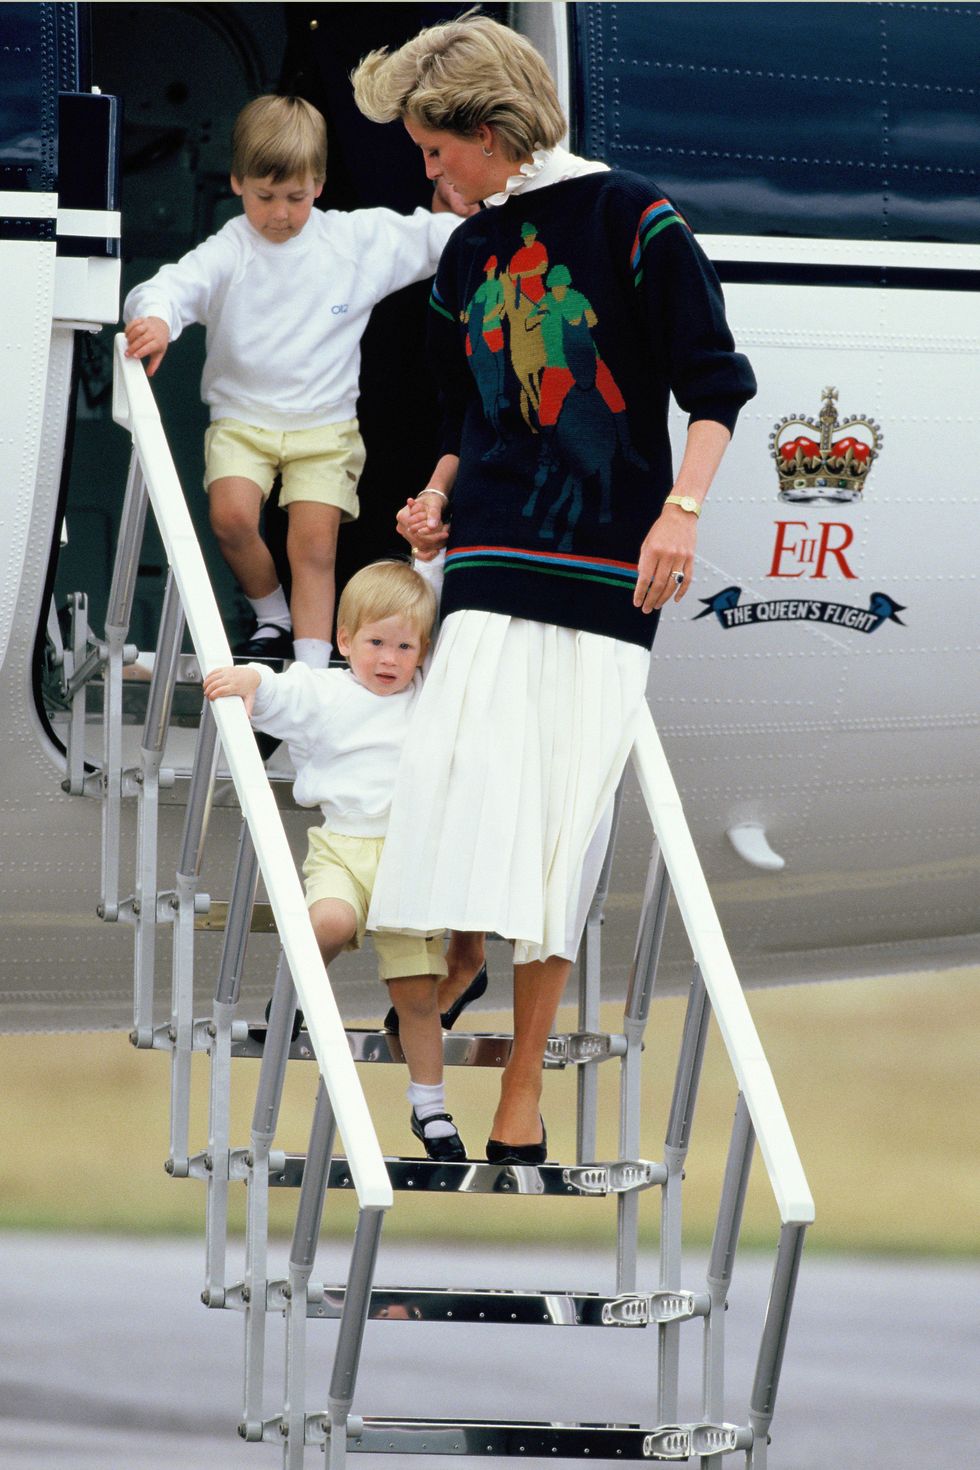 Prince William, Princess Diana and Prince Harry arrive at Aberdeen Airport for the start of their holidays in Scotland on August 15, 1986 in Aberdeen, Scotland